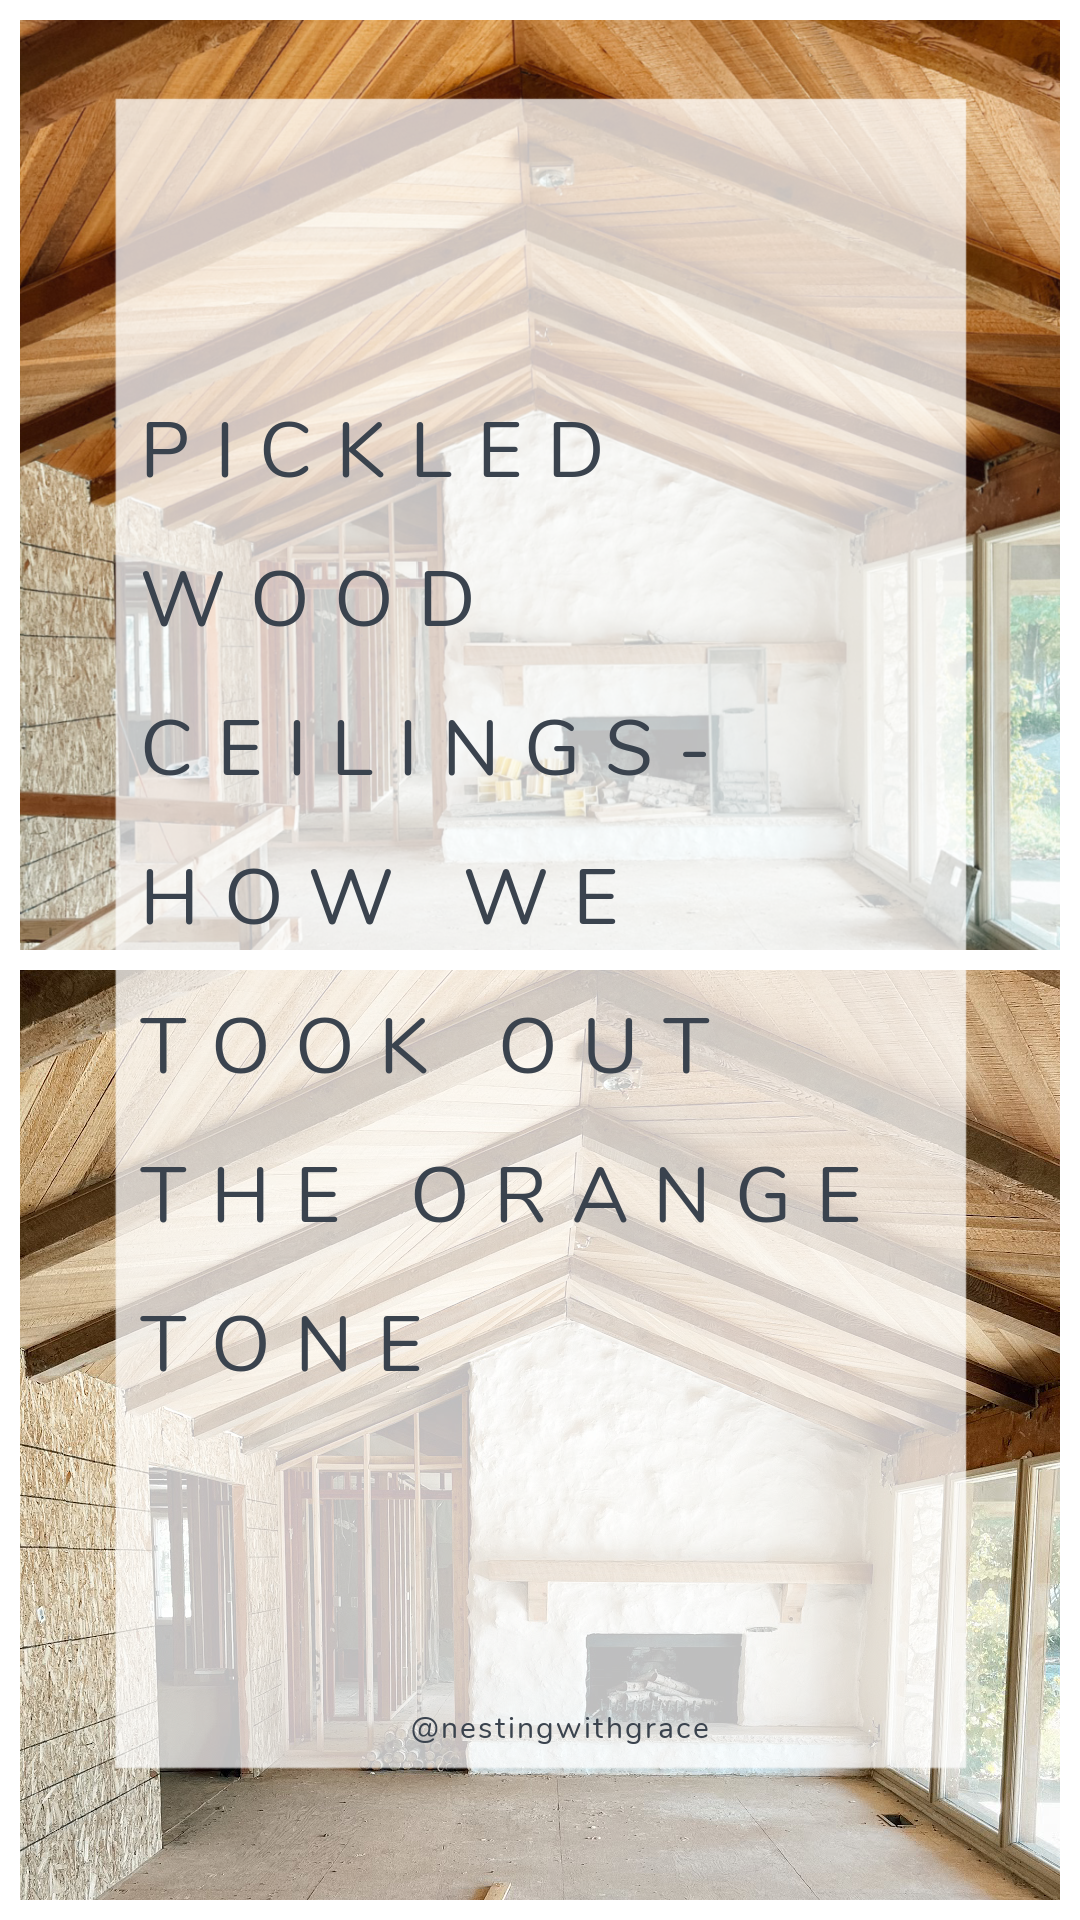 Pickled Wood Ceilings- How we took out the Orange Tone